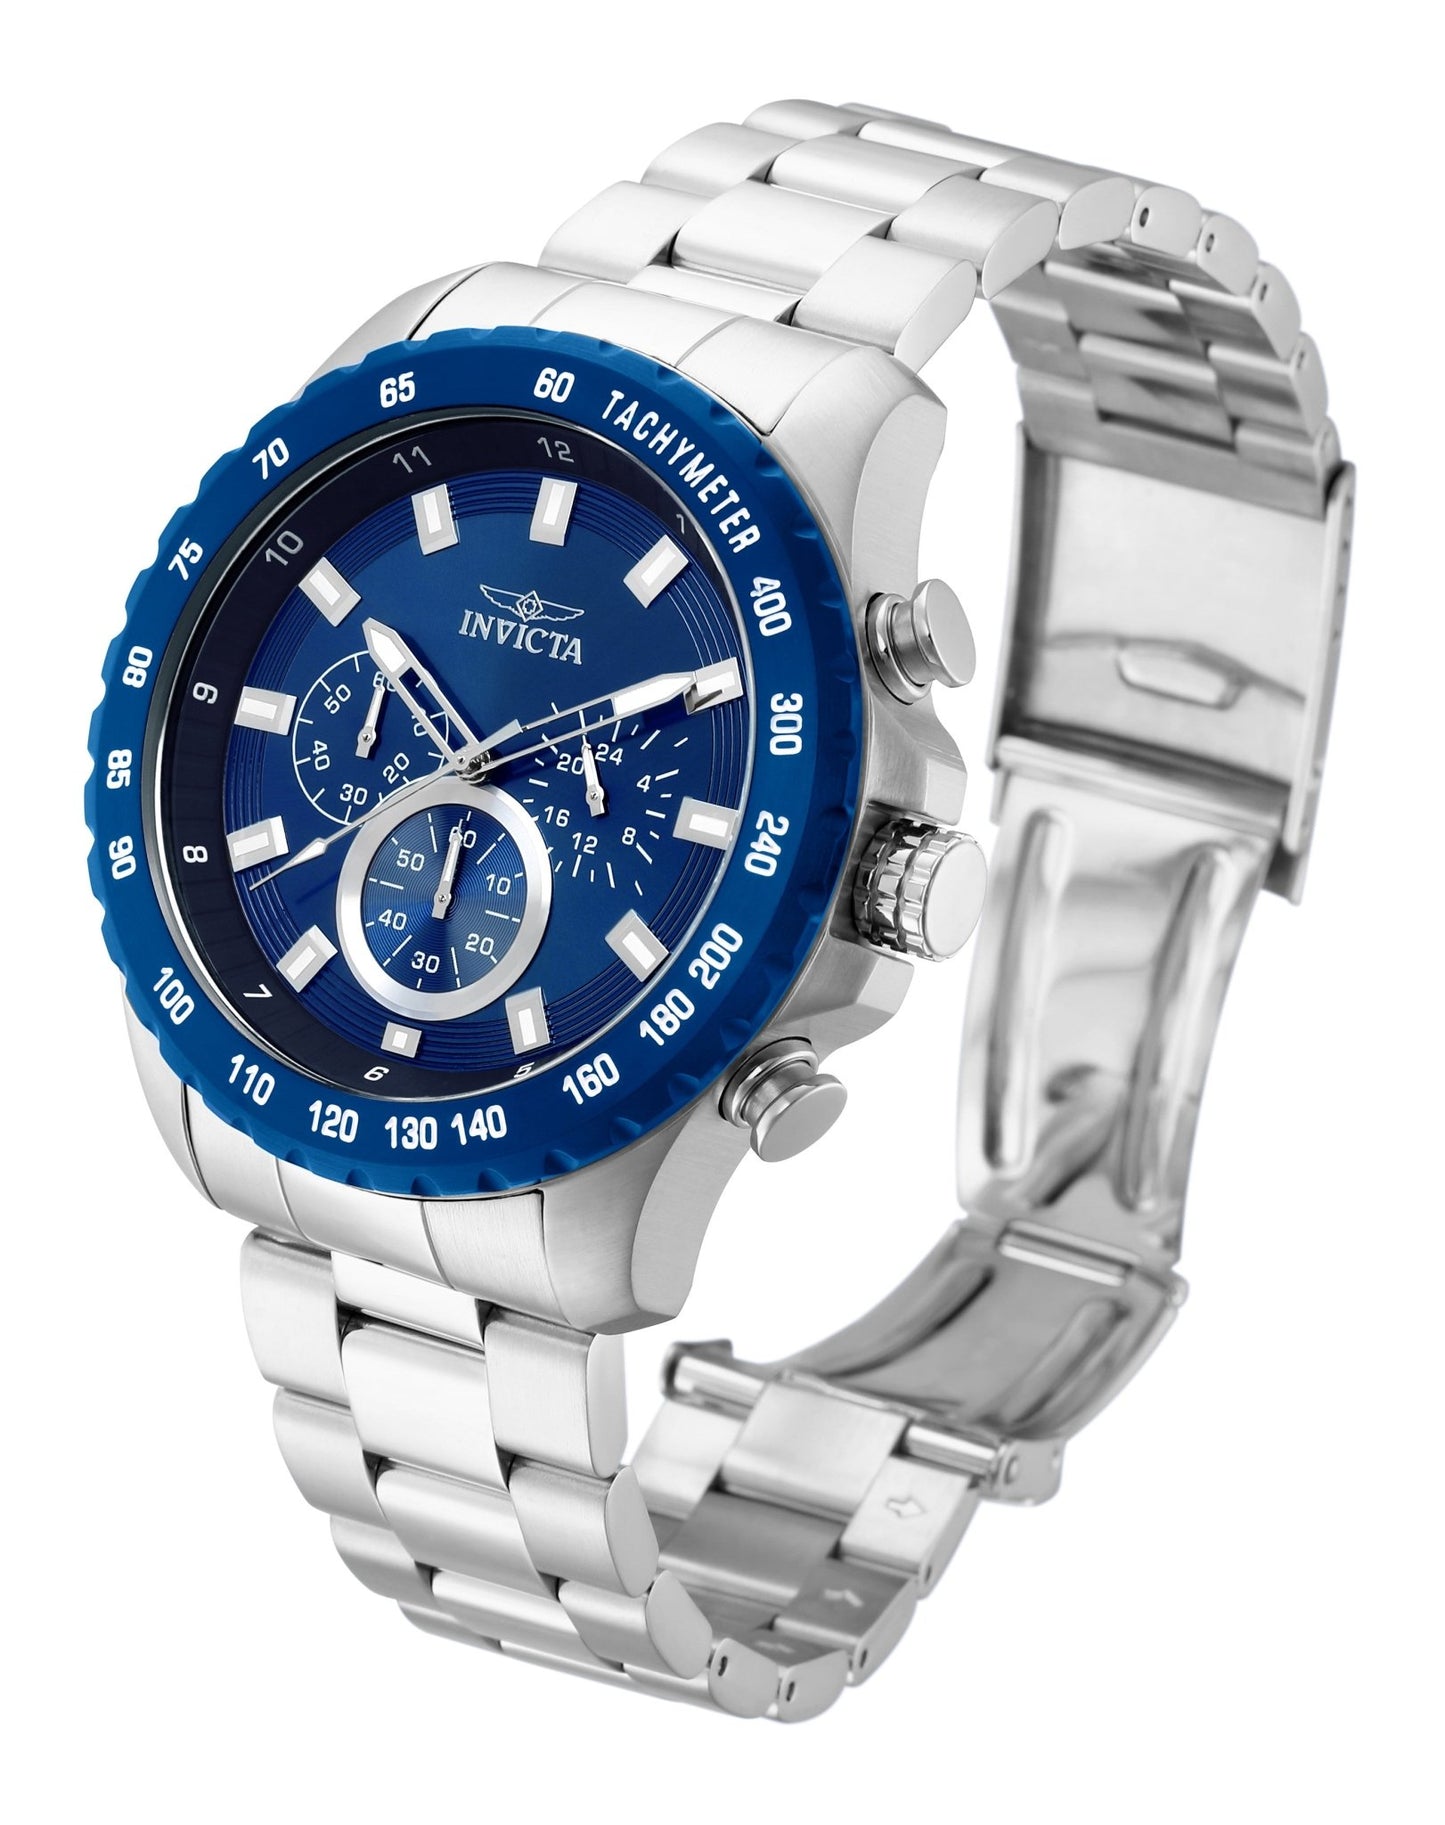 Invicta Speedway 24212 men's quartz watch with blue chronograph dial - angled view